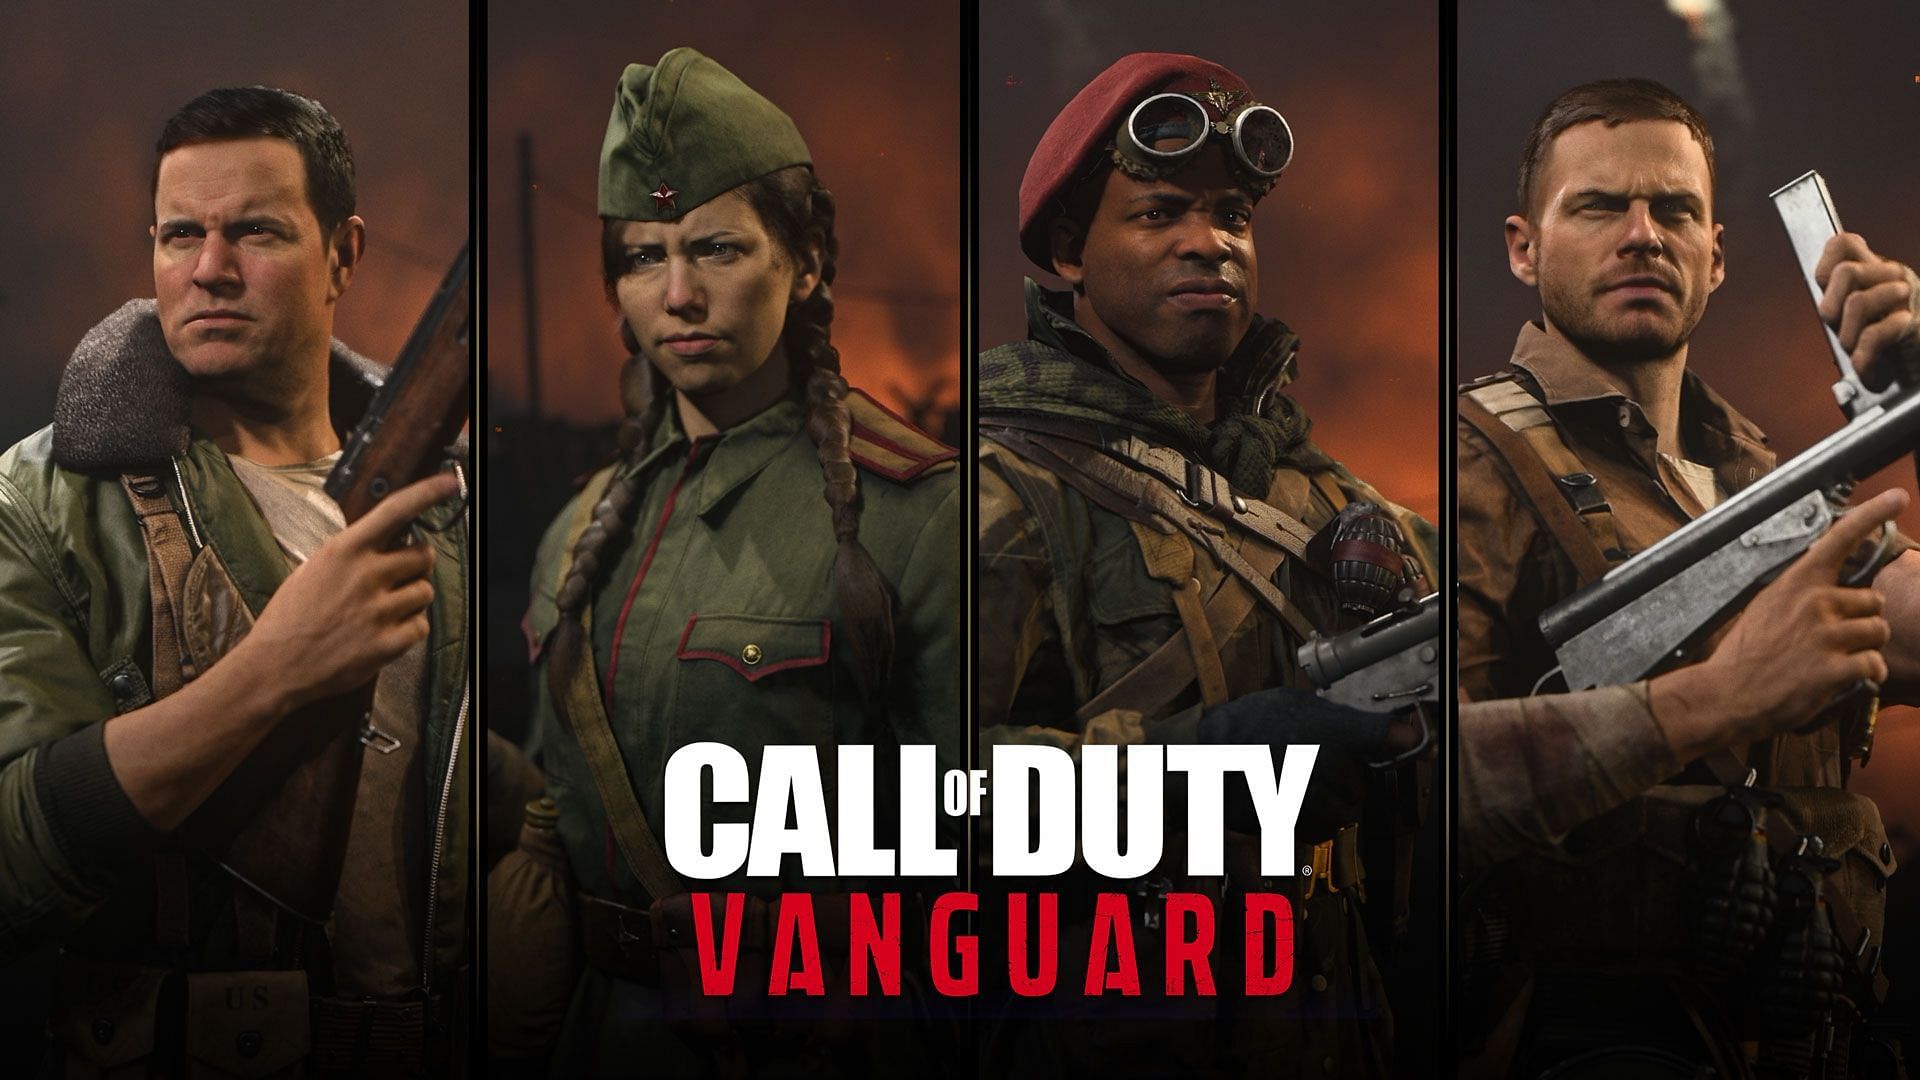 Call of Duty Vanguard was released in 2021 (Image via Activision)